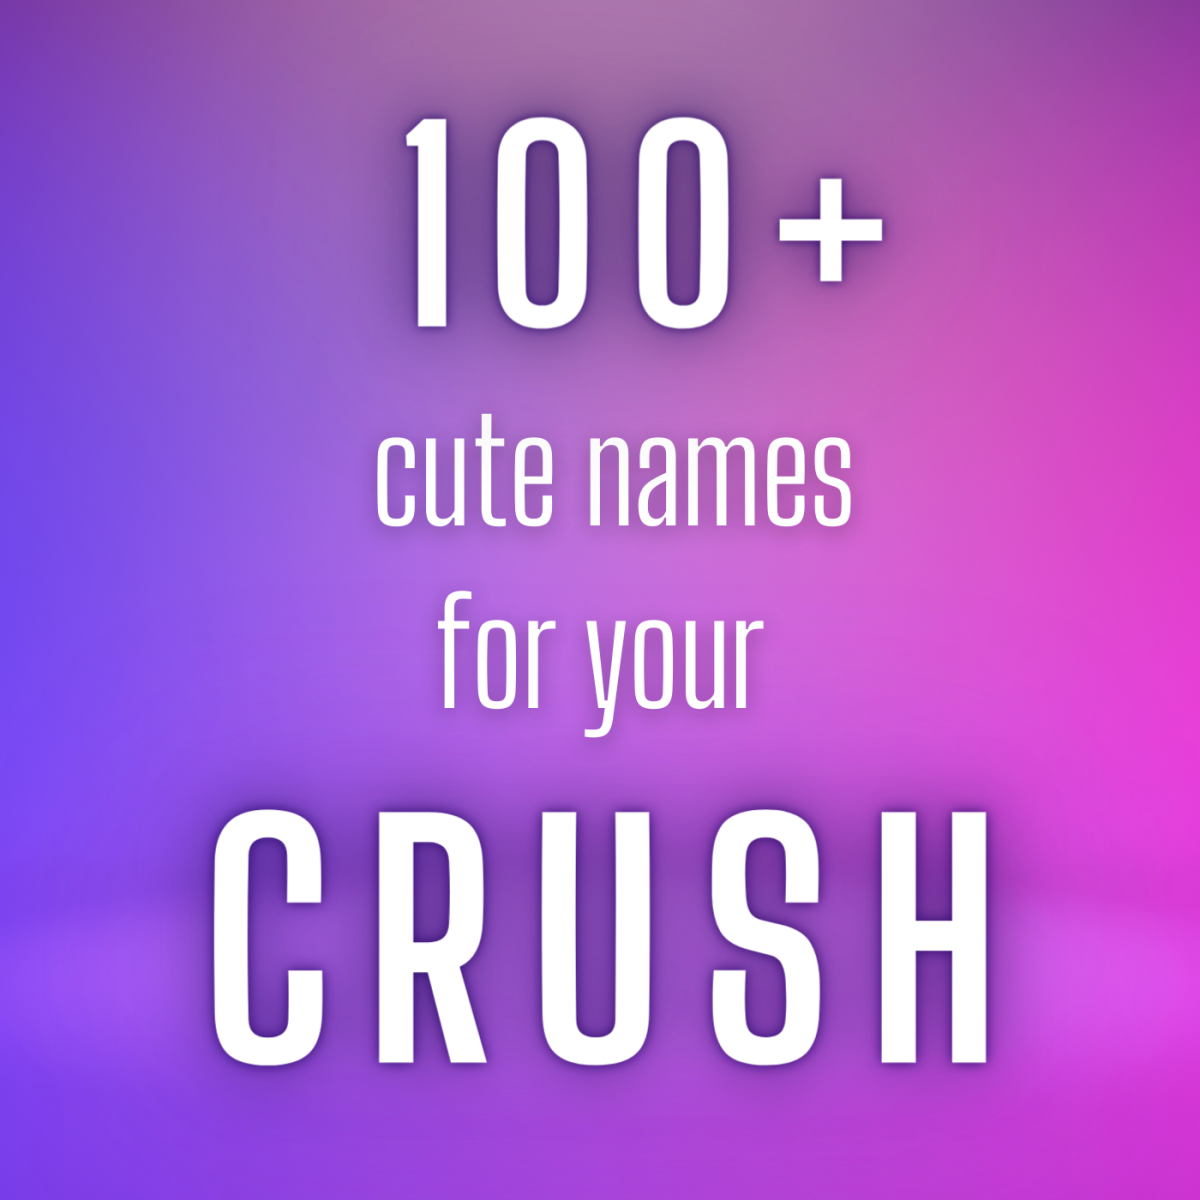 Over 100 nicknames to call your crush